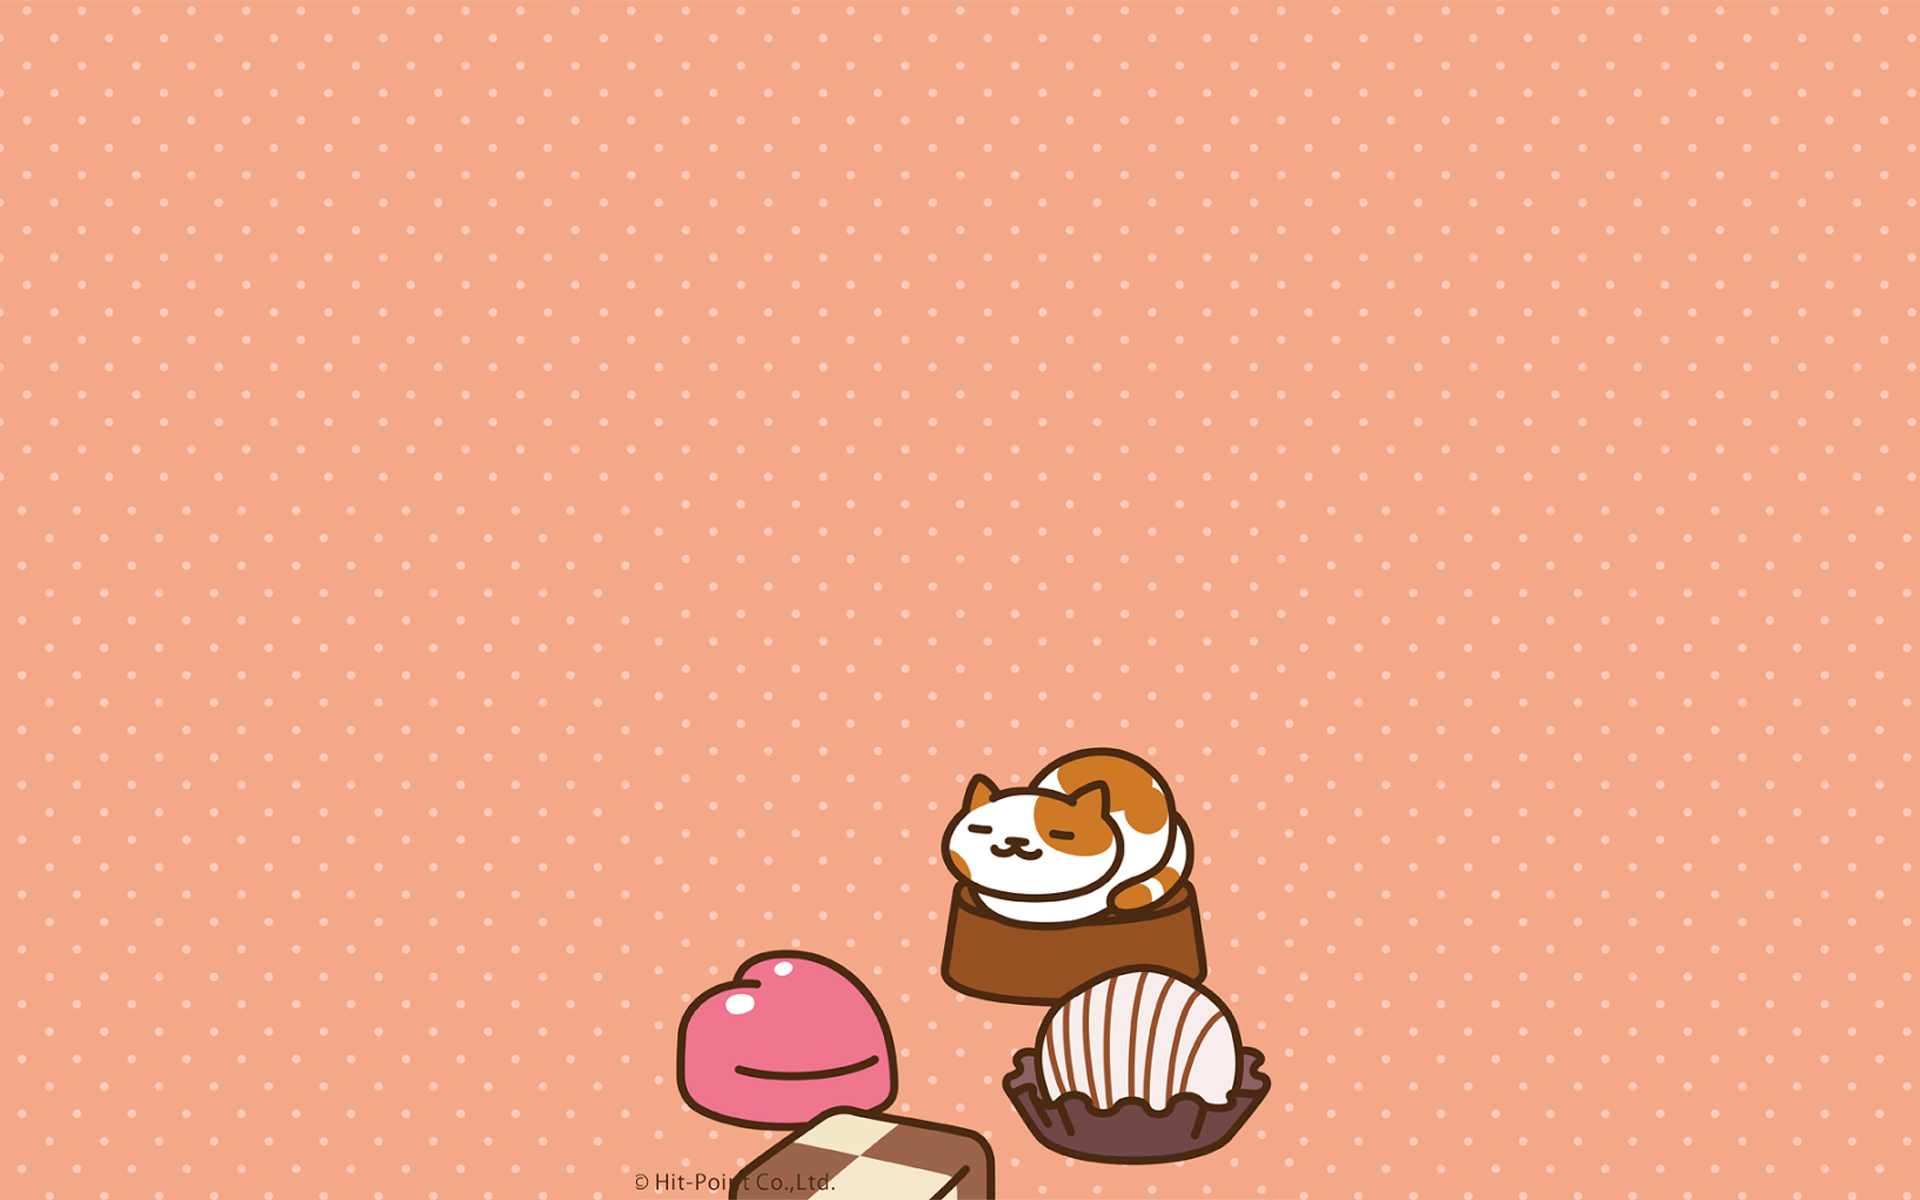 Patches and Chocolates by Neko Atsume